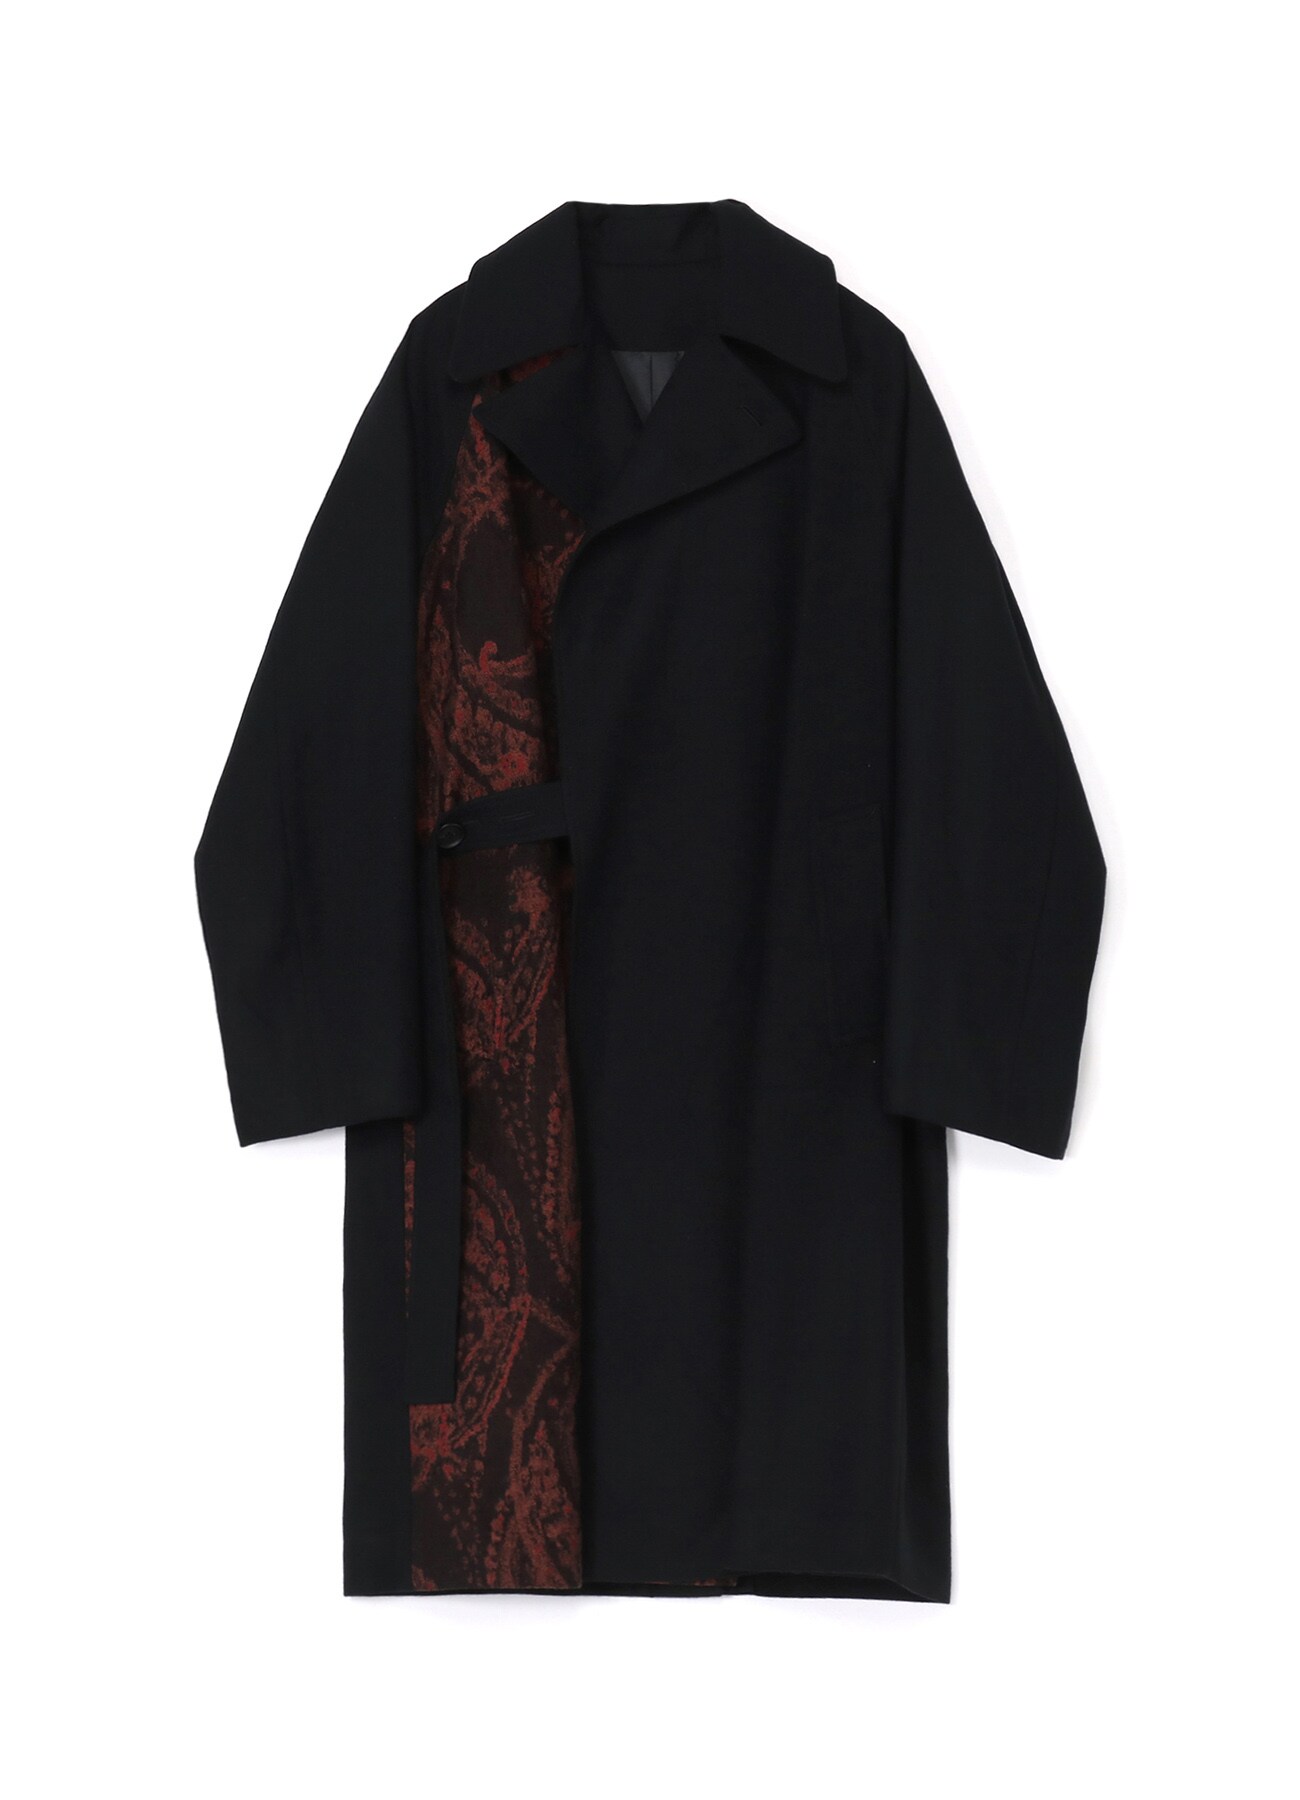 BLENDED ETERMINE TIE-LOCKEN COAT WITH FABRIC SWITCH DESIGN ON RIGHT FRONT